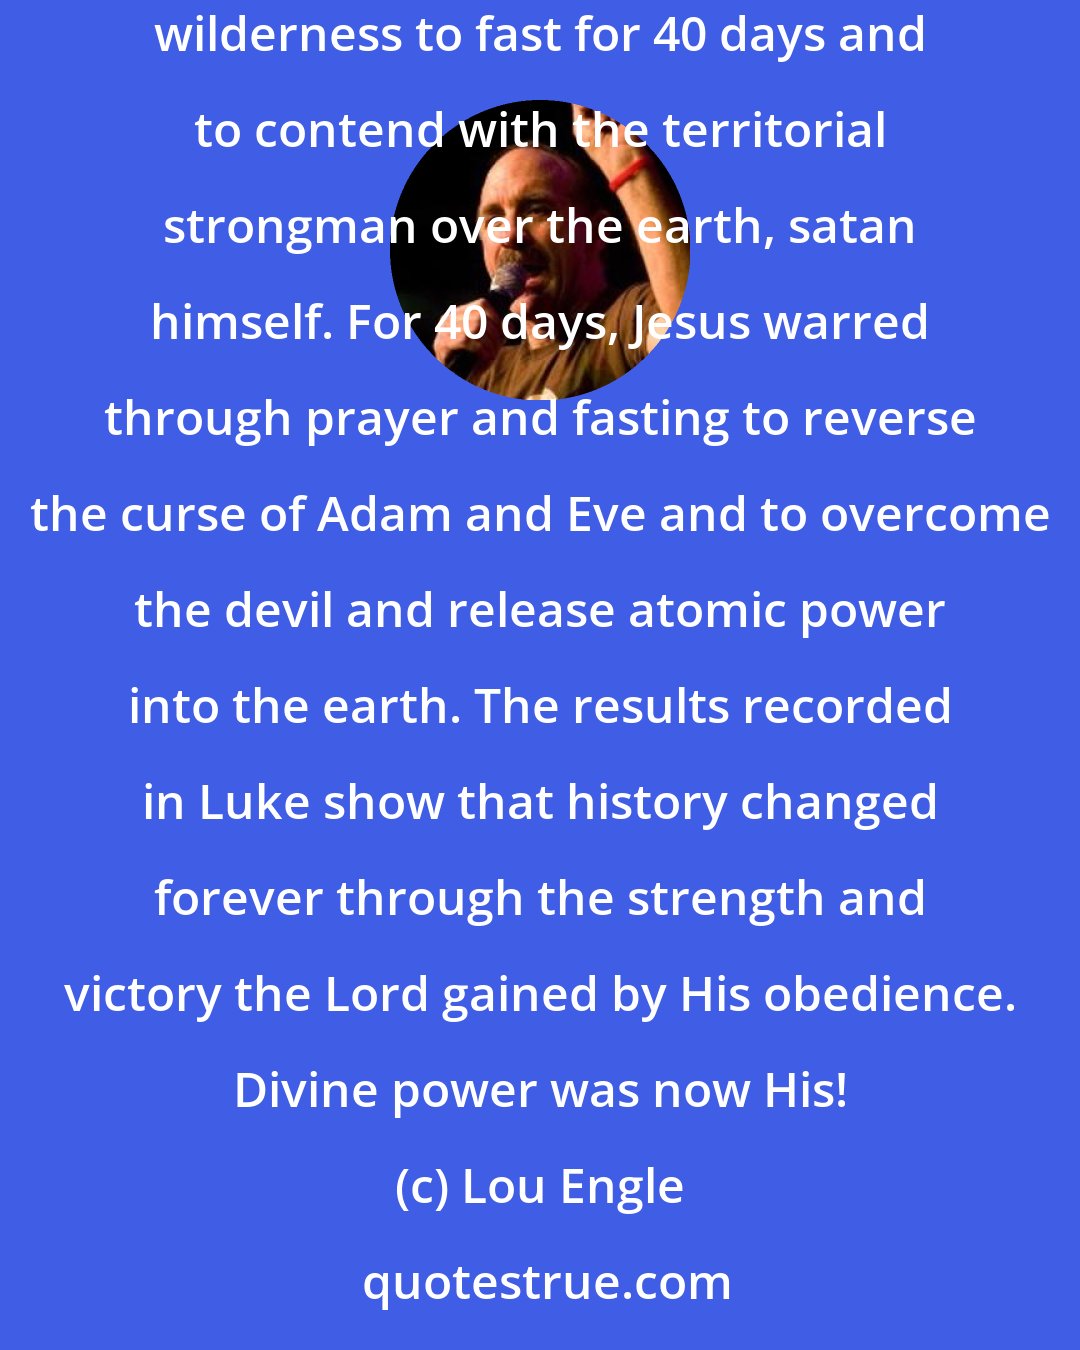 Lou Engle: When Jesus was baptized by John, the heavens opened and the Dove descended upon Him. Immediately thereafter, that same Dove drove Him into the wilderness to fast for 40 days and to contend with the territorial strongman over the earth, satan himself. For 40 days, Jesus warred through prayer and fasting to reverse the curse of Adam and Eve and to overcome the devil and release atomic power into the earth. The results recorded in Luke show that history changed forever through the strength and victory the Lord gained by His obedience. Divine power was now His!